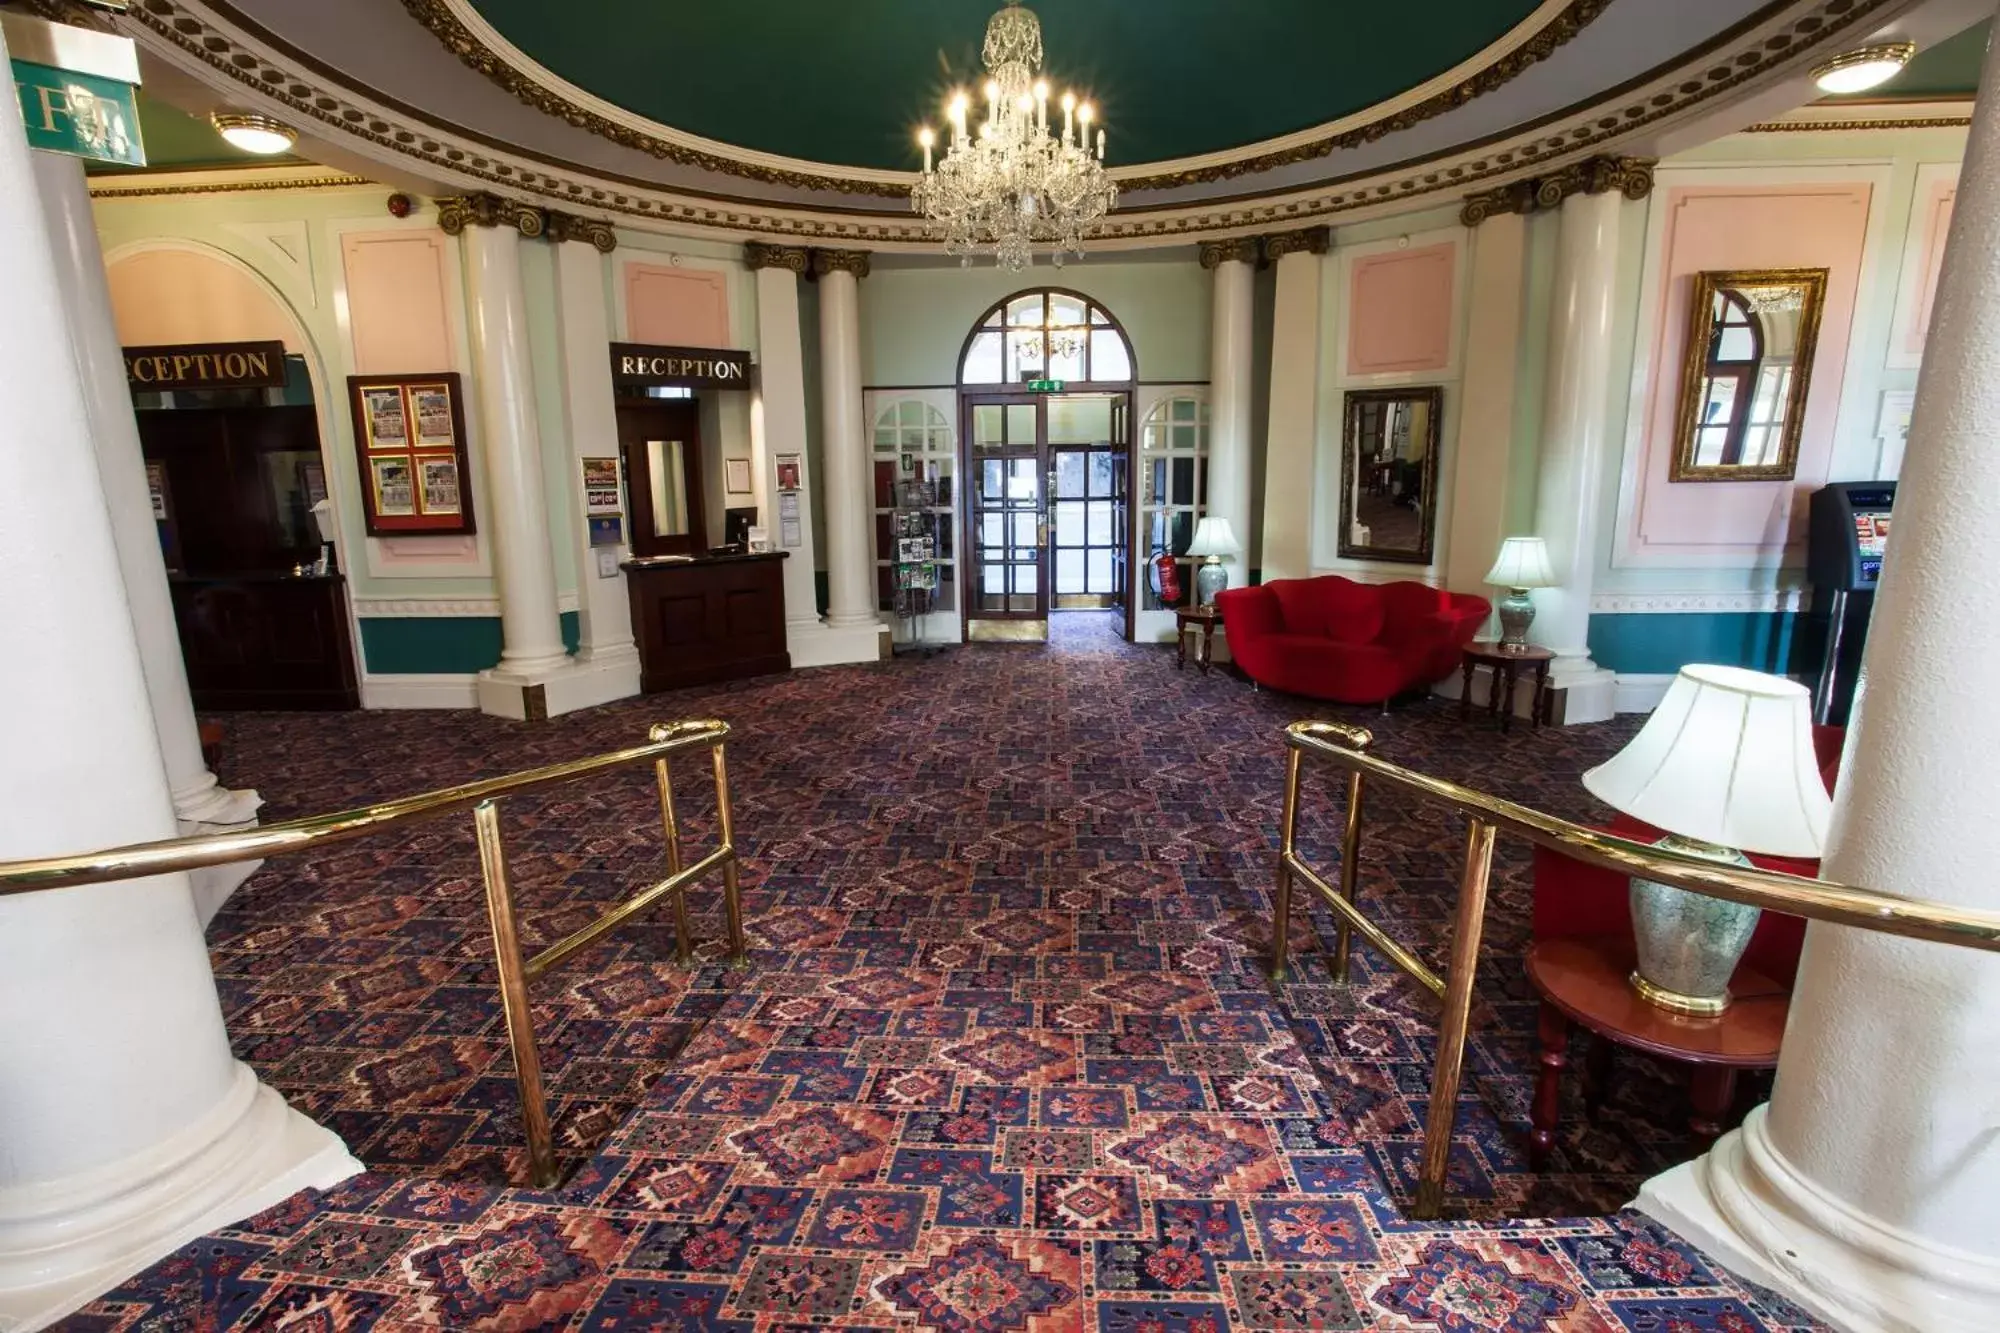 Lobby or reception in The Grand Hotel